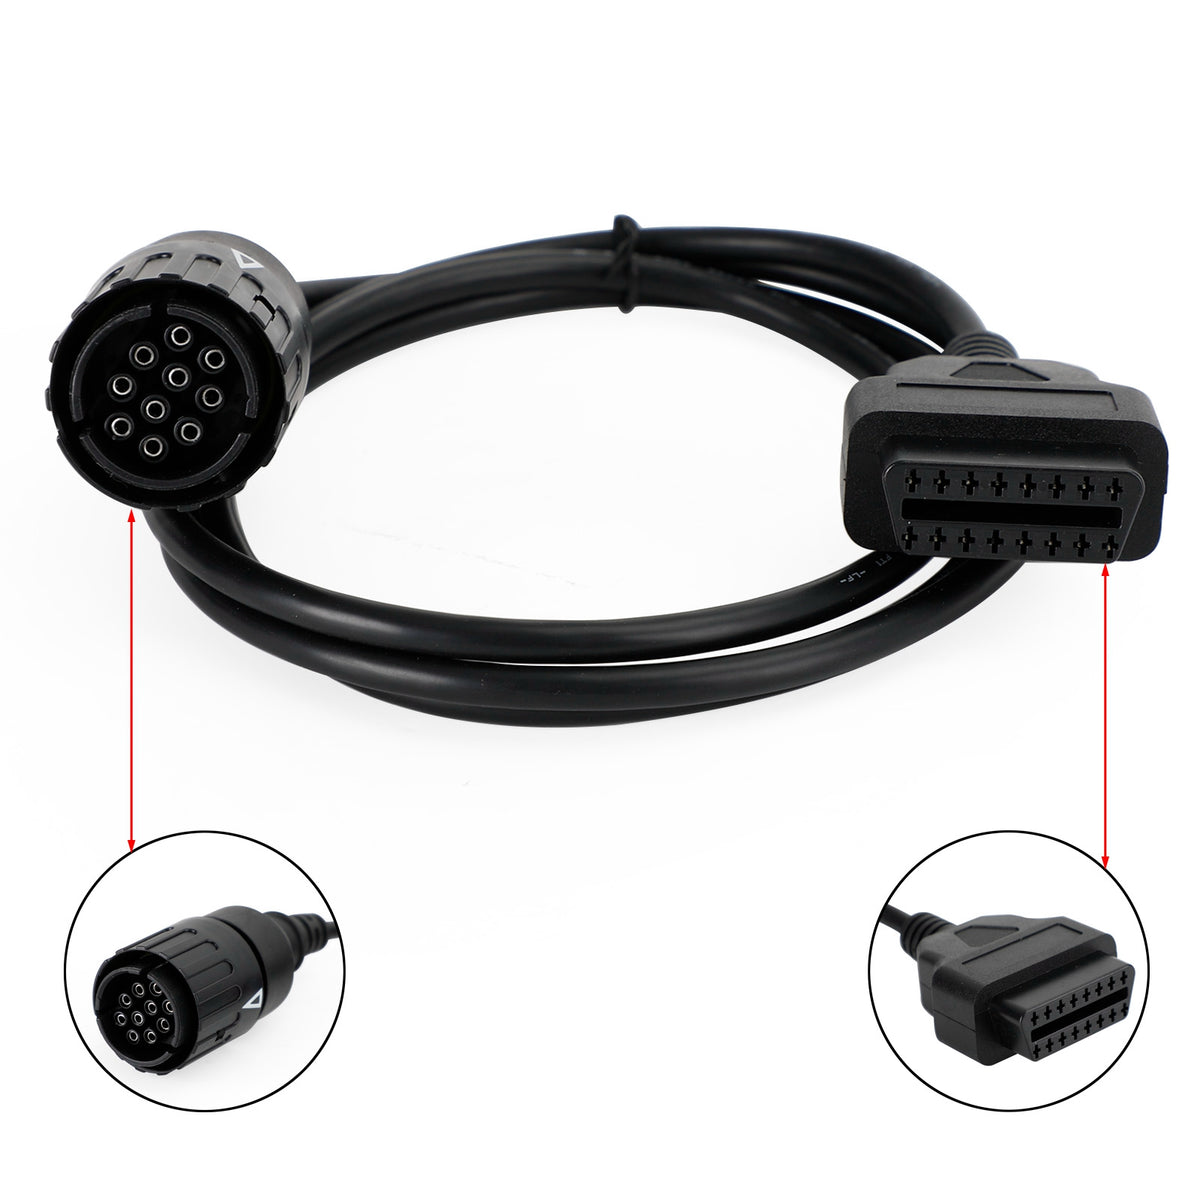 Motorcycle 10 Pin To 16Pin For BMW OBD2 Cable Connector Diagnostic Scanner Cable Generic